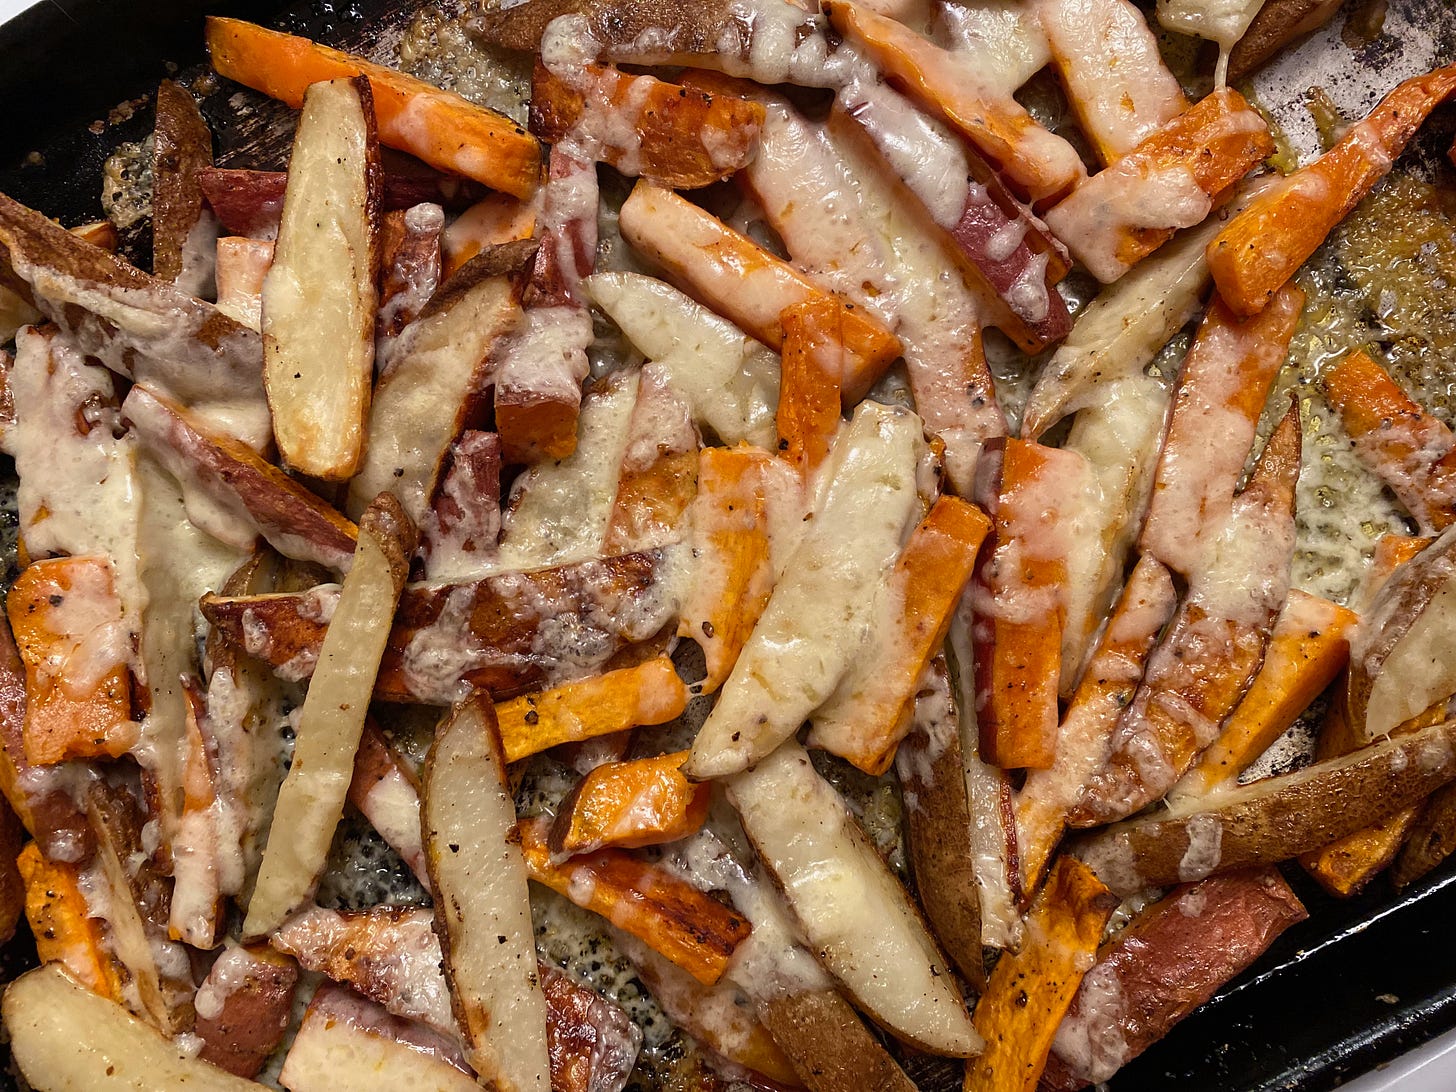 A pile of white and sweet potato wedges on a baking tray, covered in cheese. The potatoes ave crispy brown edges, and the cheese is melted and bubbling.